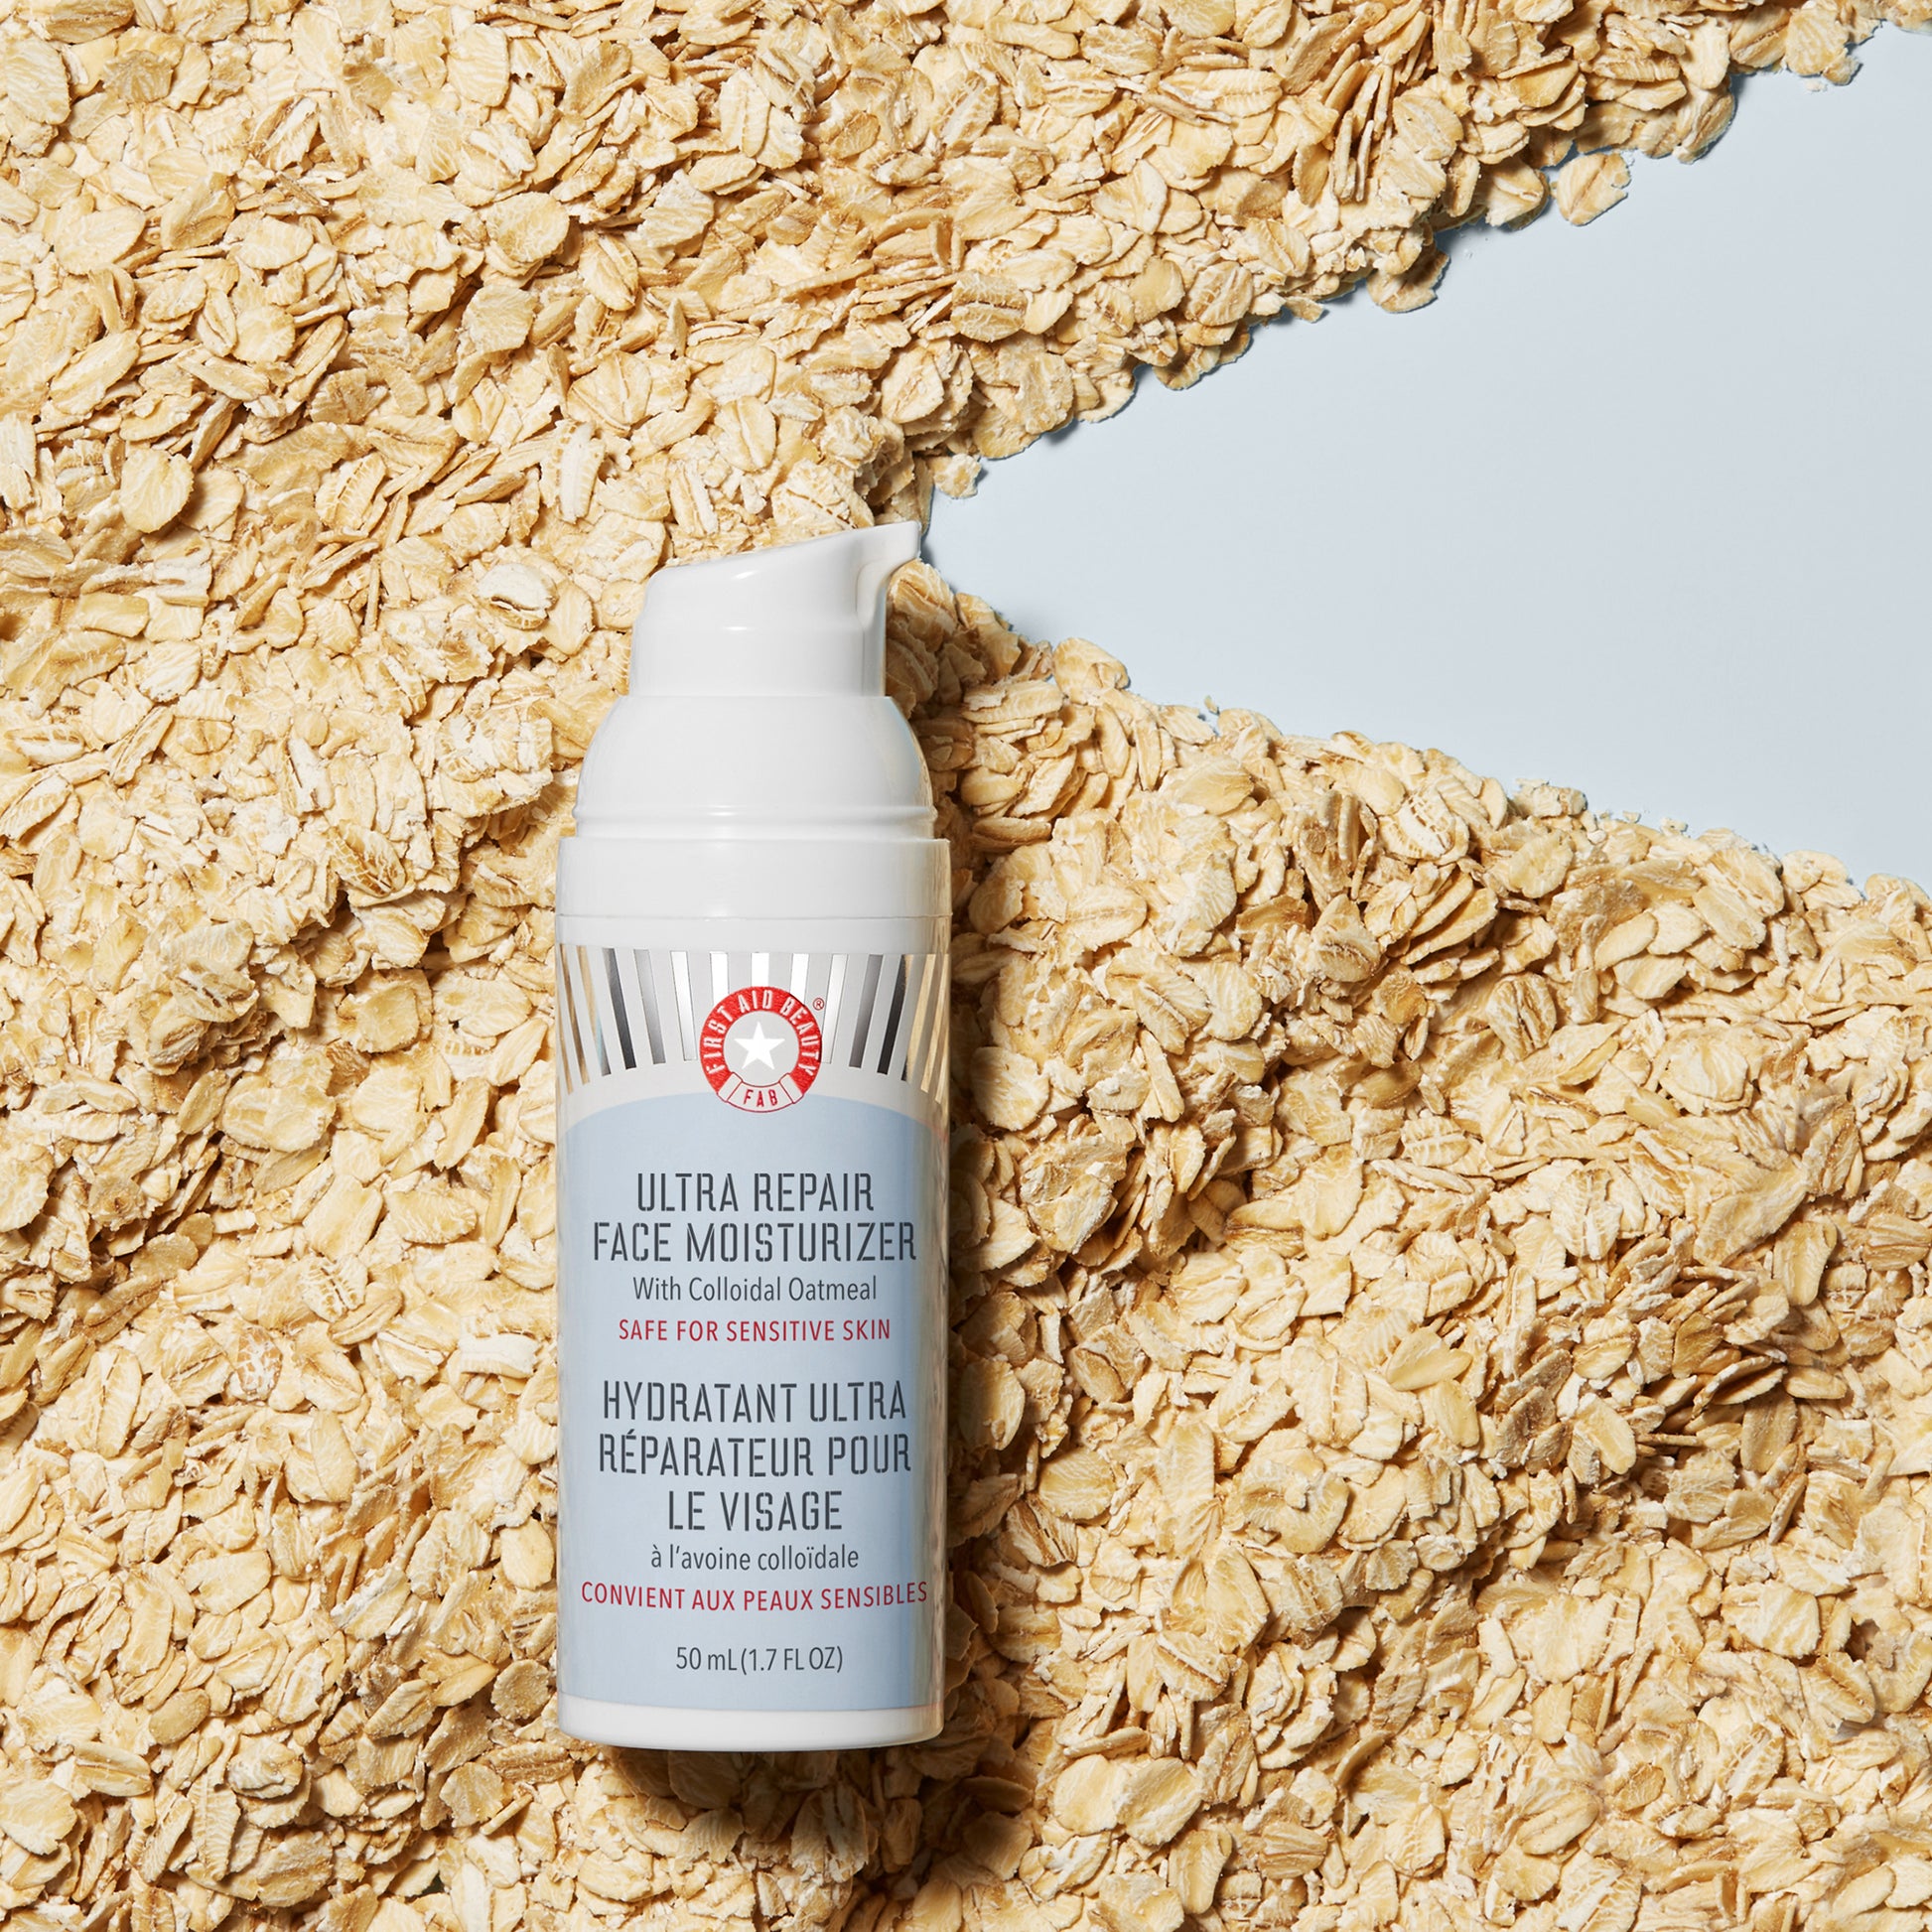 Ultra Repair Face Moisturizer on textured background of oats